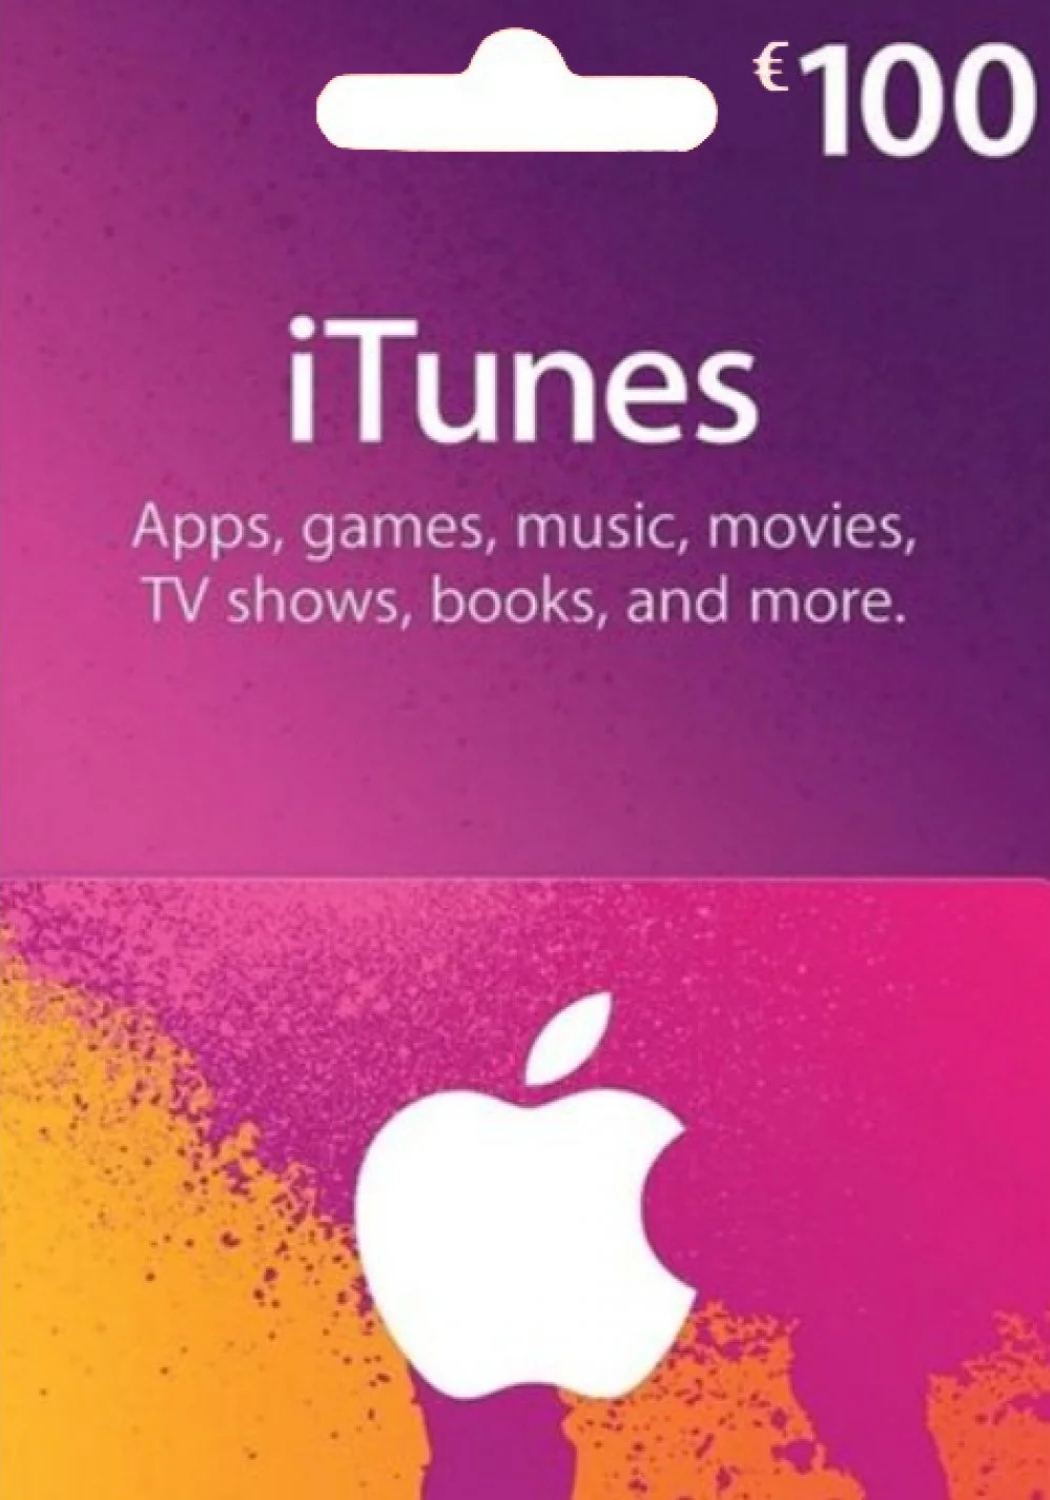 iTunes 100 EUR digital Account Card Gift Italy 